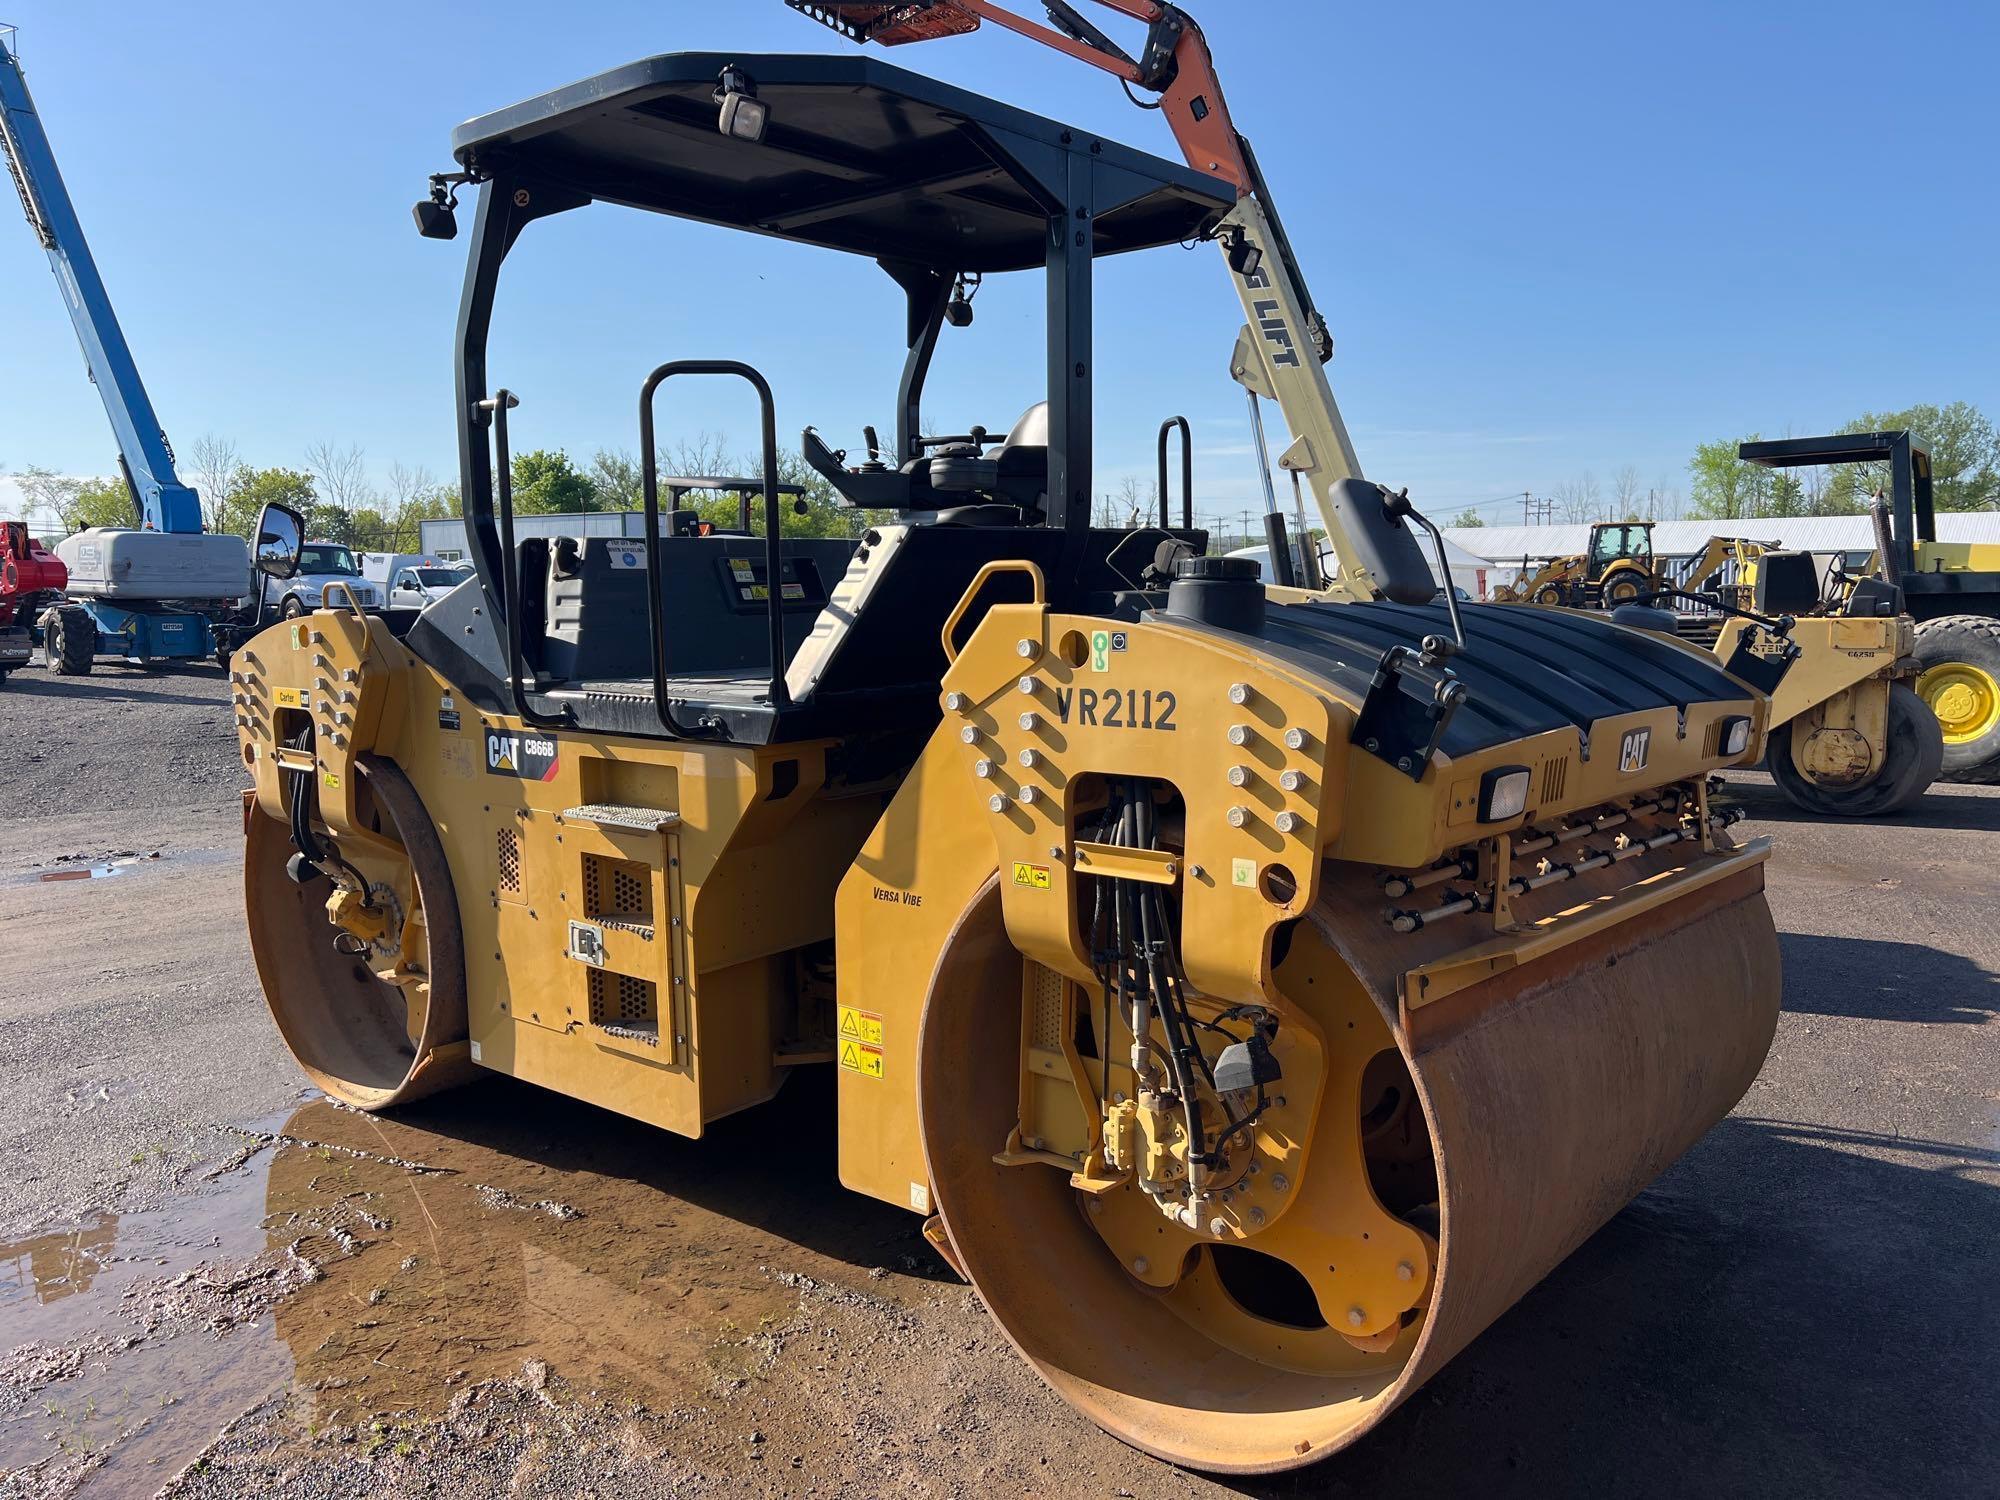 2017 CAT CB66B ASPHALT ROLLER SN:B6600247 powered by Cat diesel engine, equipped with OROPS, 84in.